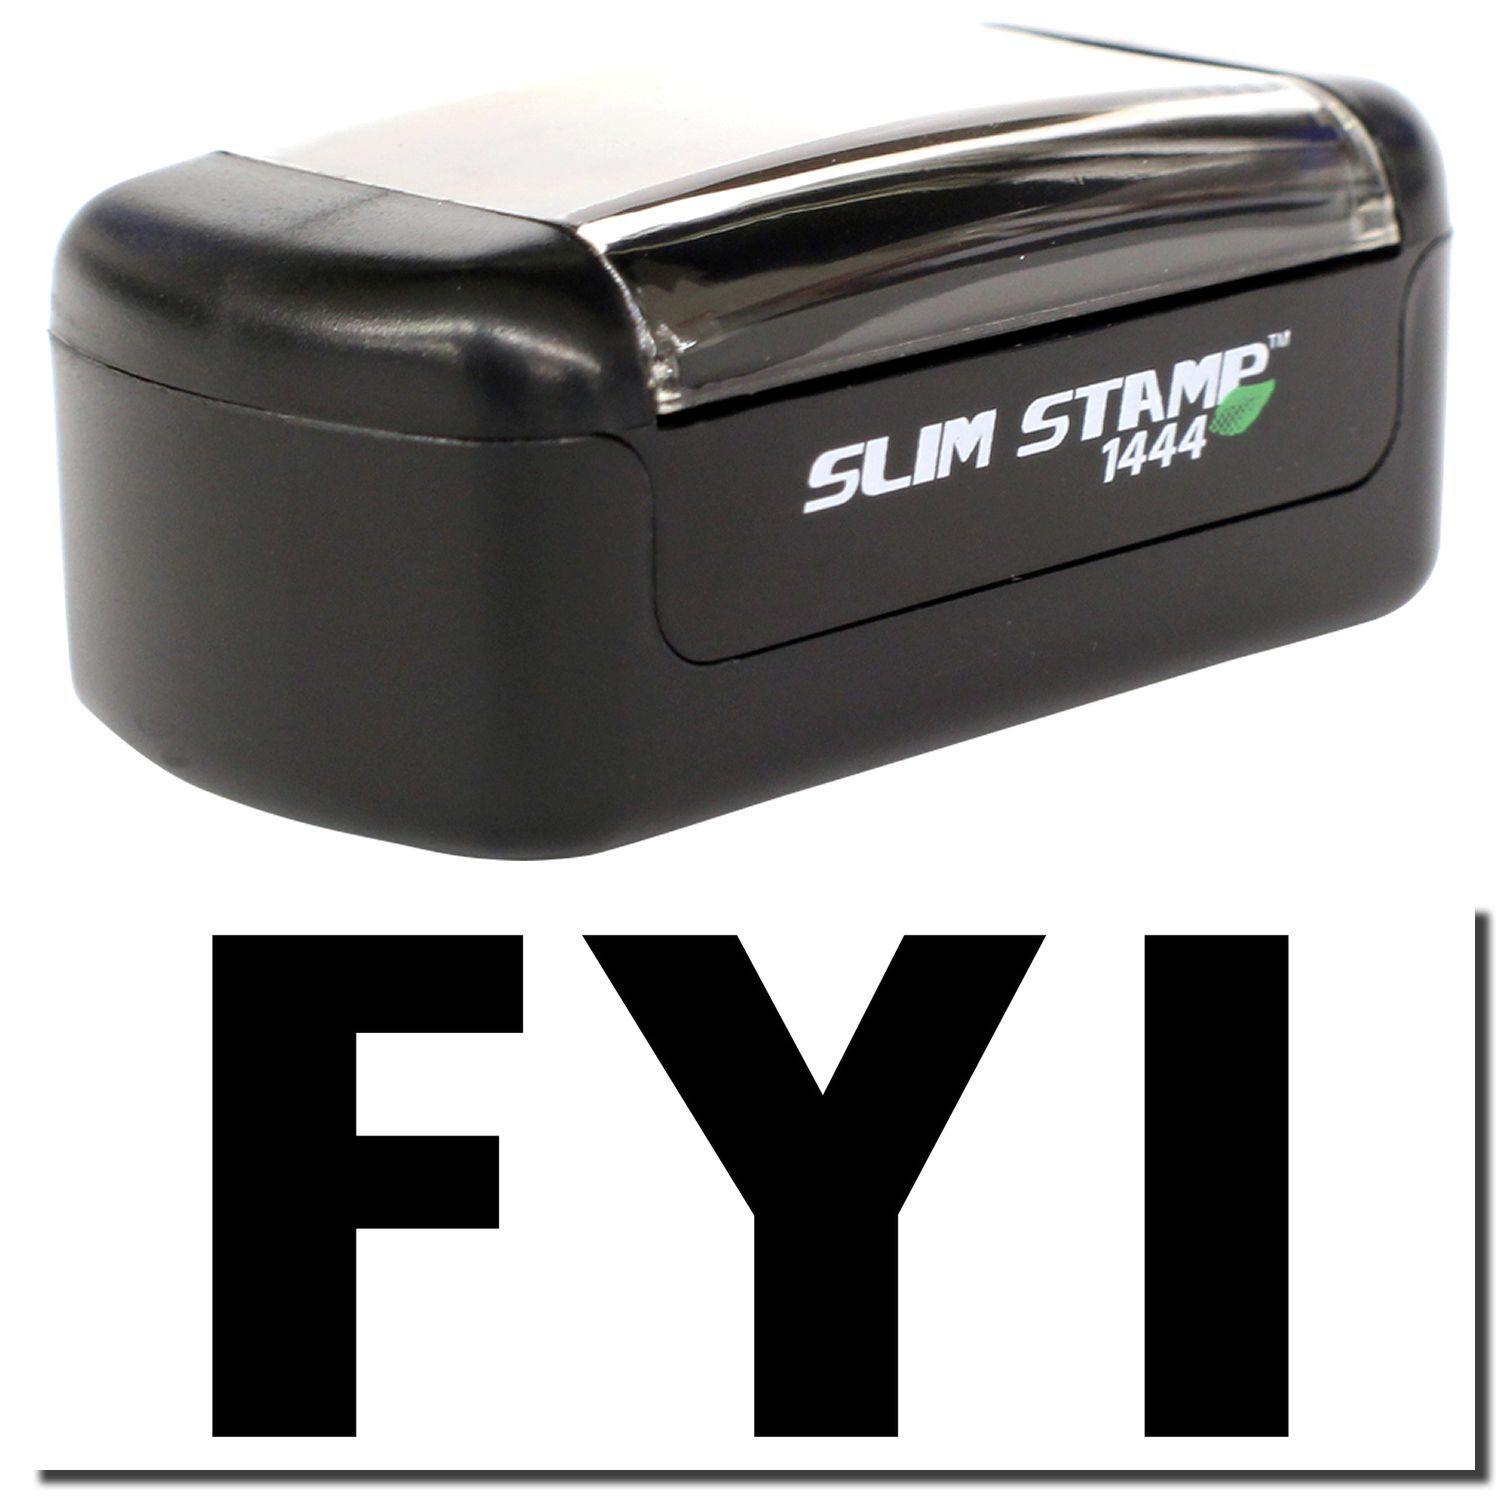 A stock office pre-inked stamp with a stamped image showing how the text "FYI" is displayed after stamping.